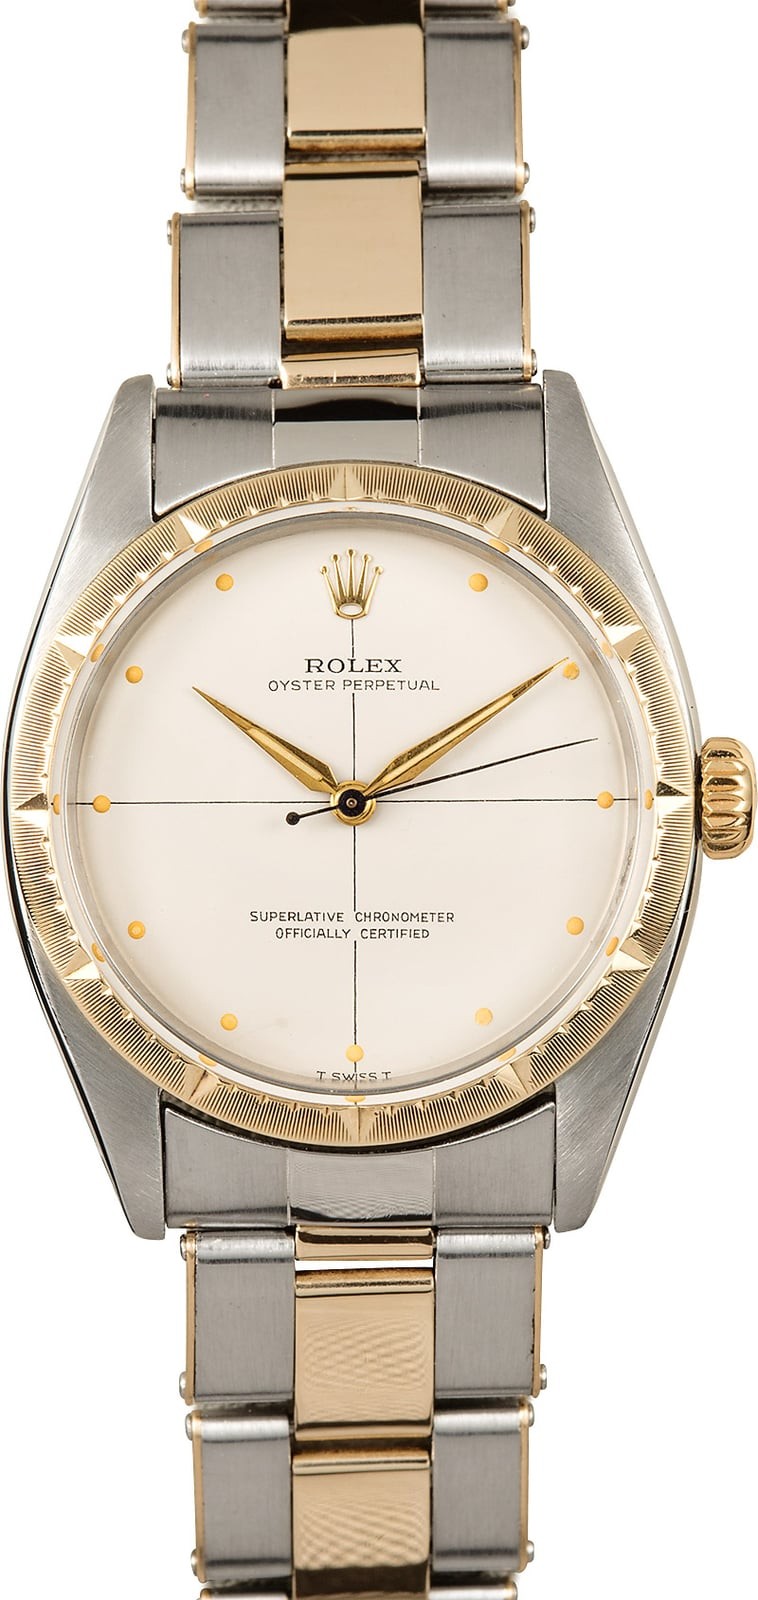 Replica Vintage Rolex Oyster Perpetual 6582 WE00653